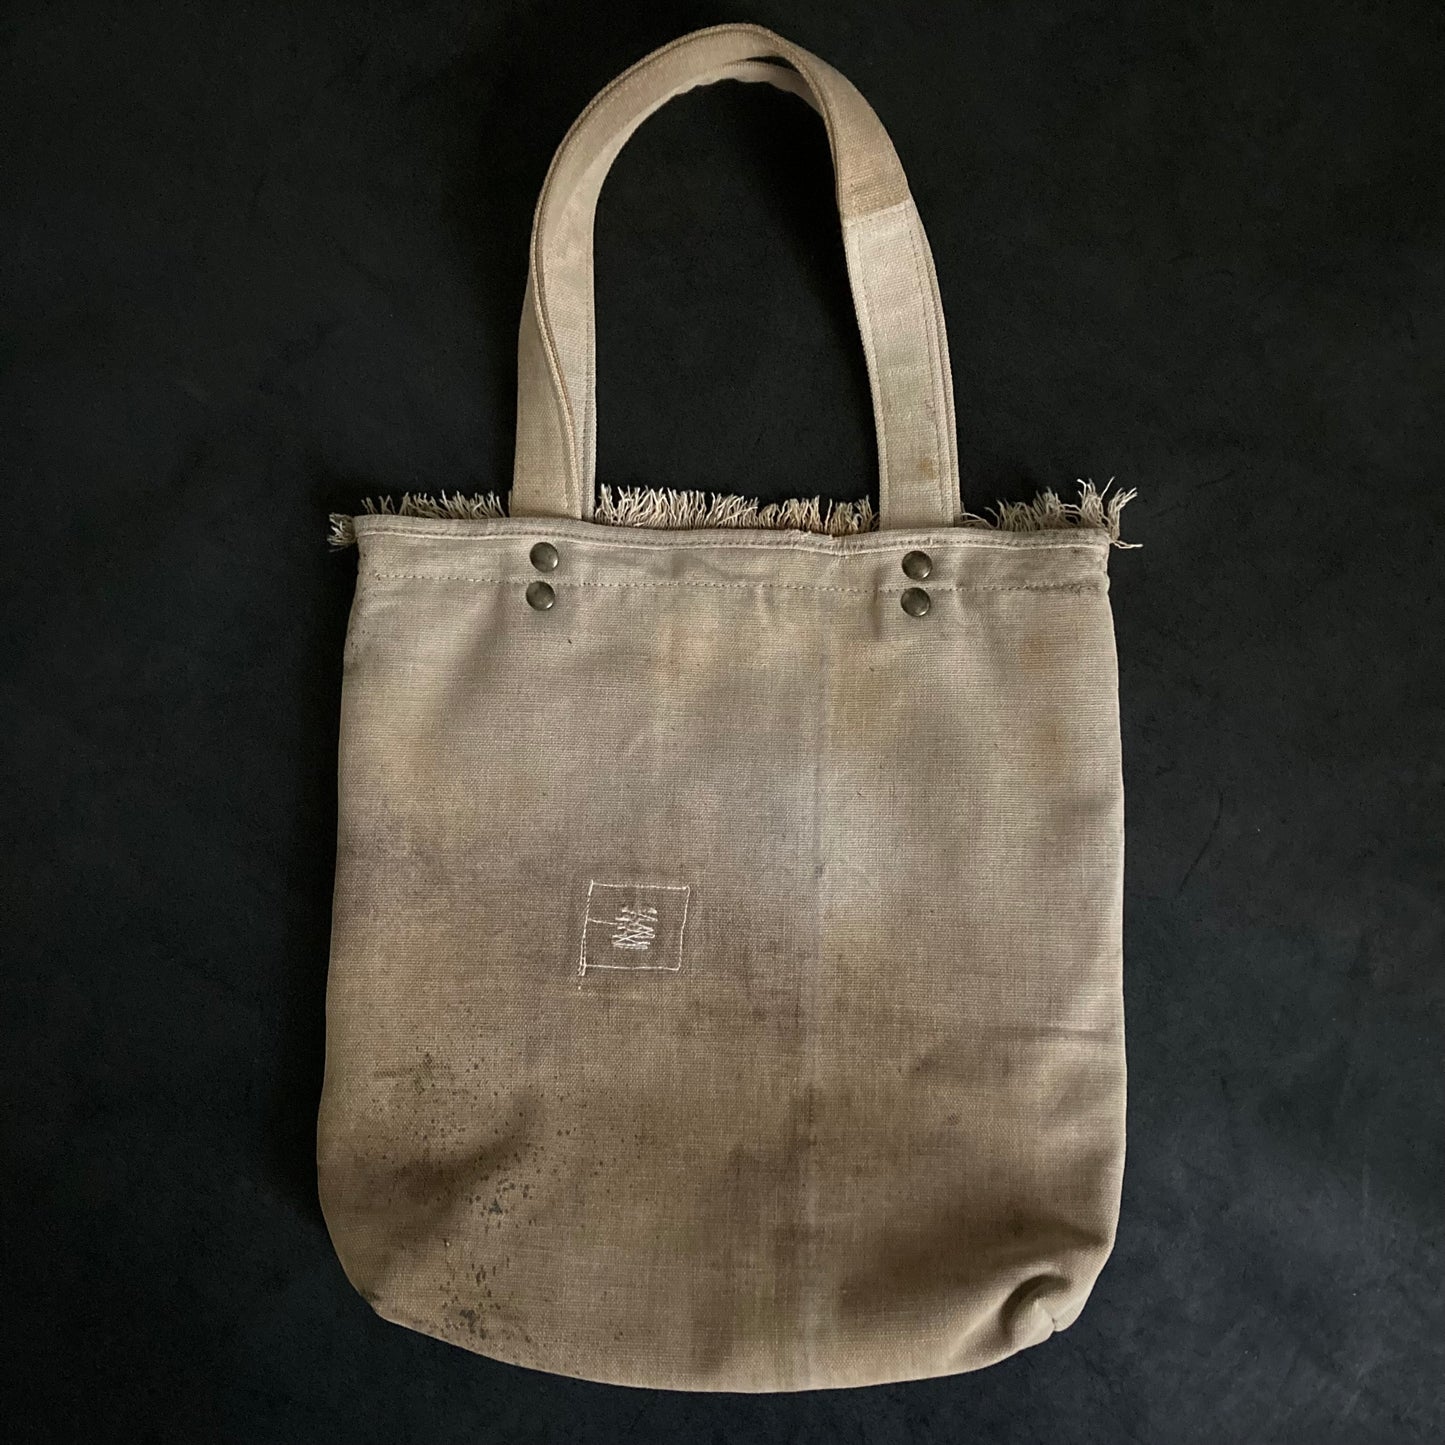 Old fabric paint  tote bag